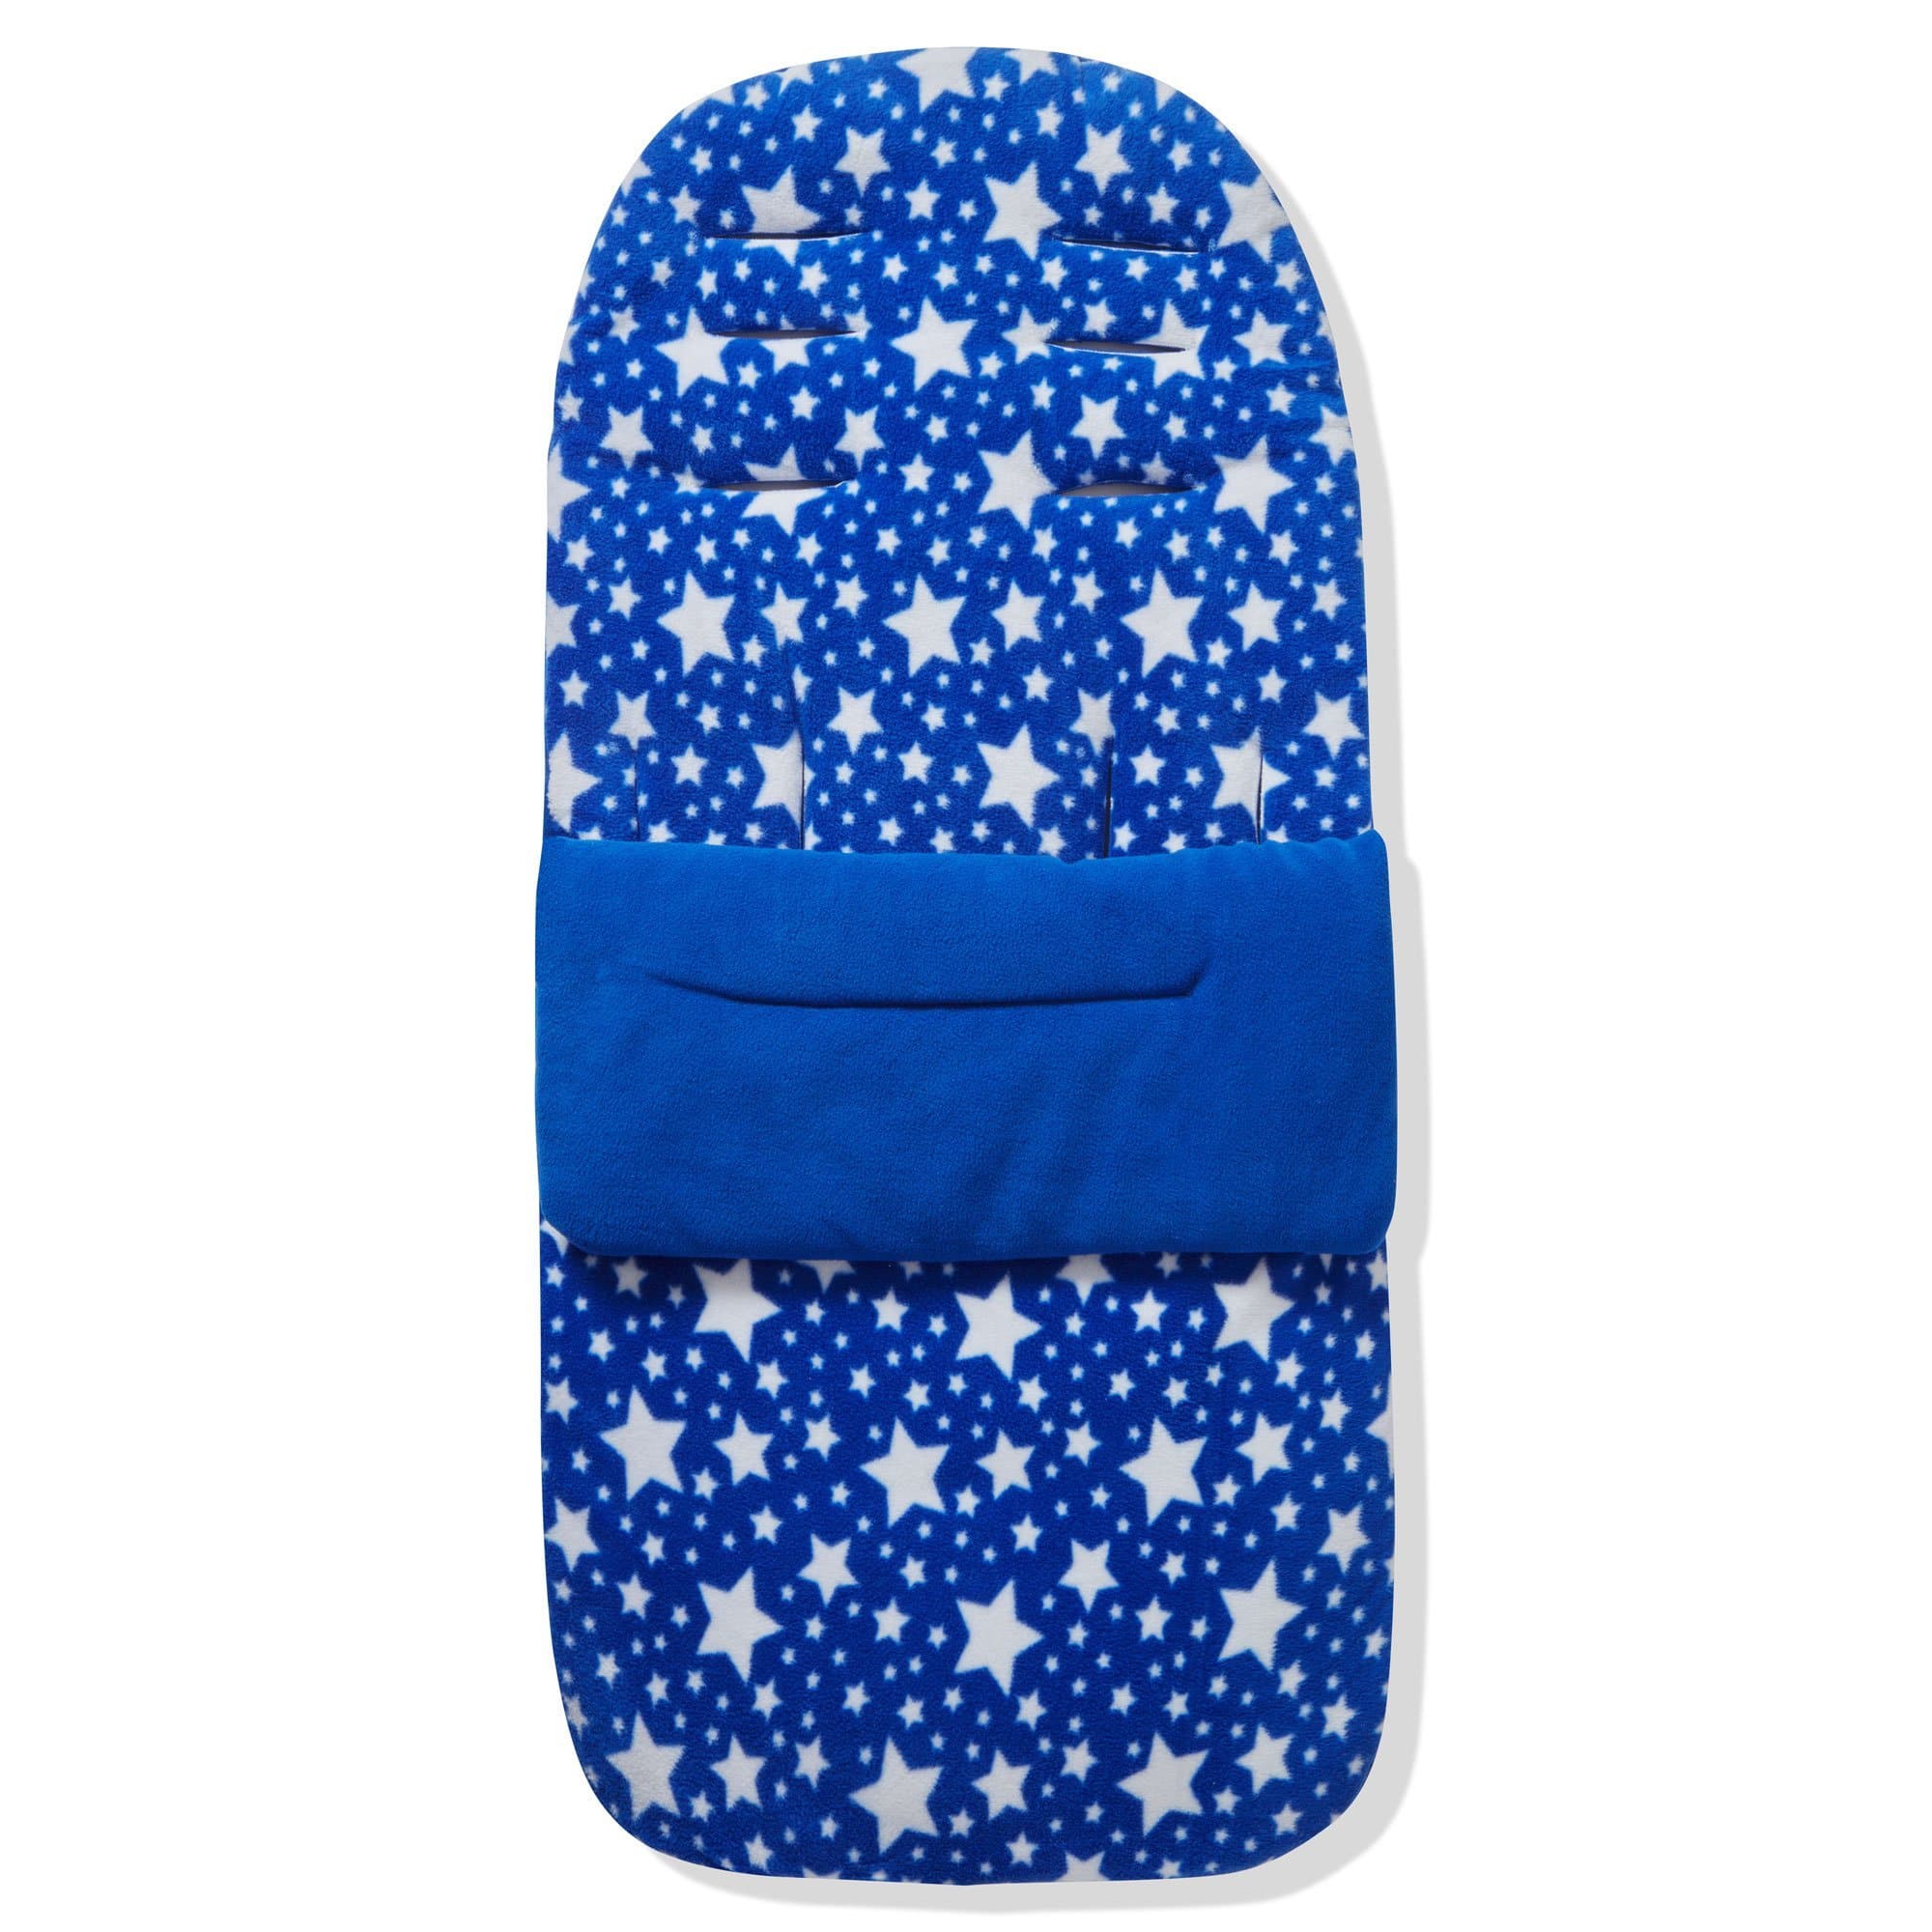 Fleece Footmuff / Cosy Toes Compatible with XTS - Blue Star / Fits All Models | For Your Little One